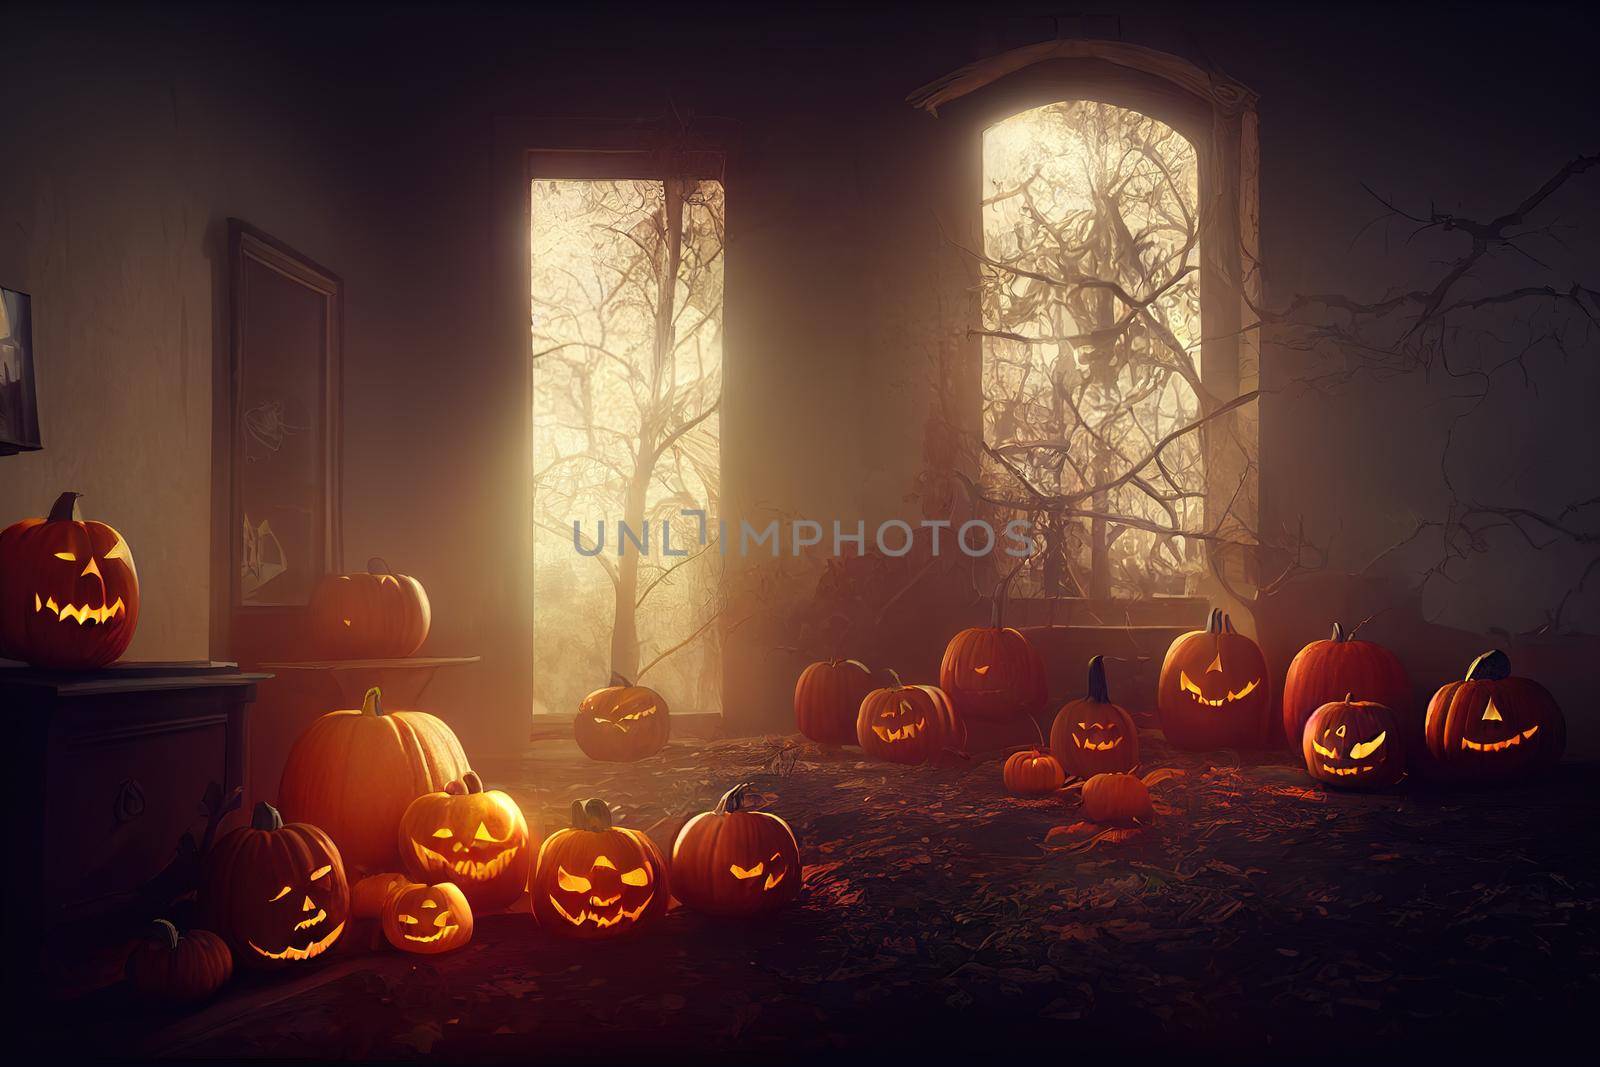 Halloween pumpkins in abandoned house interior by 2ragon